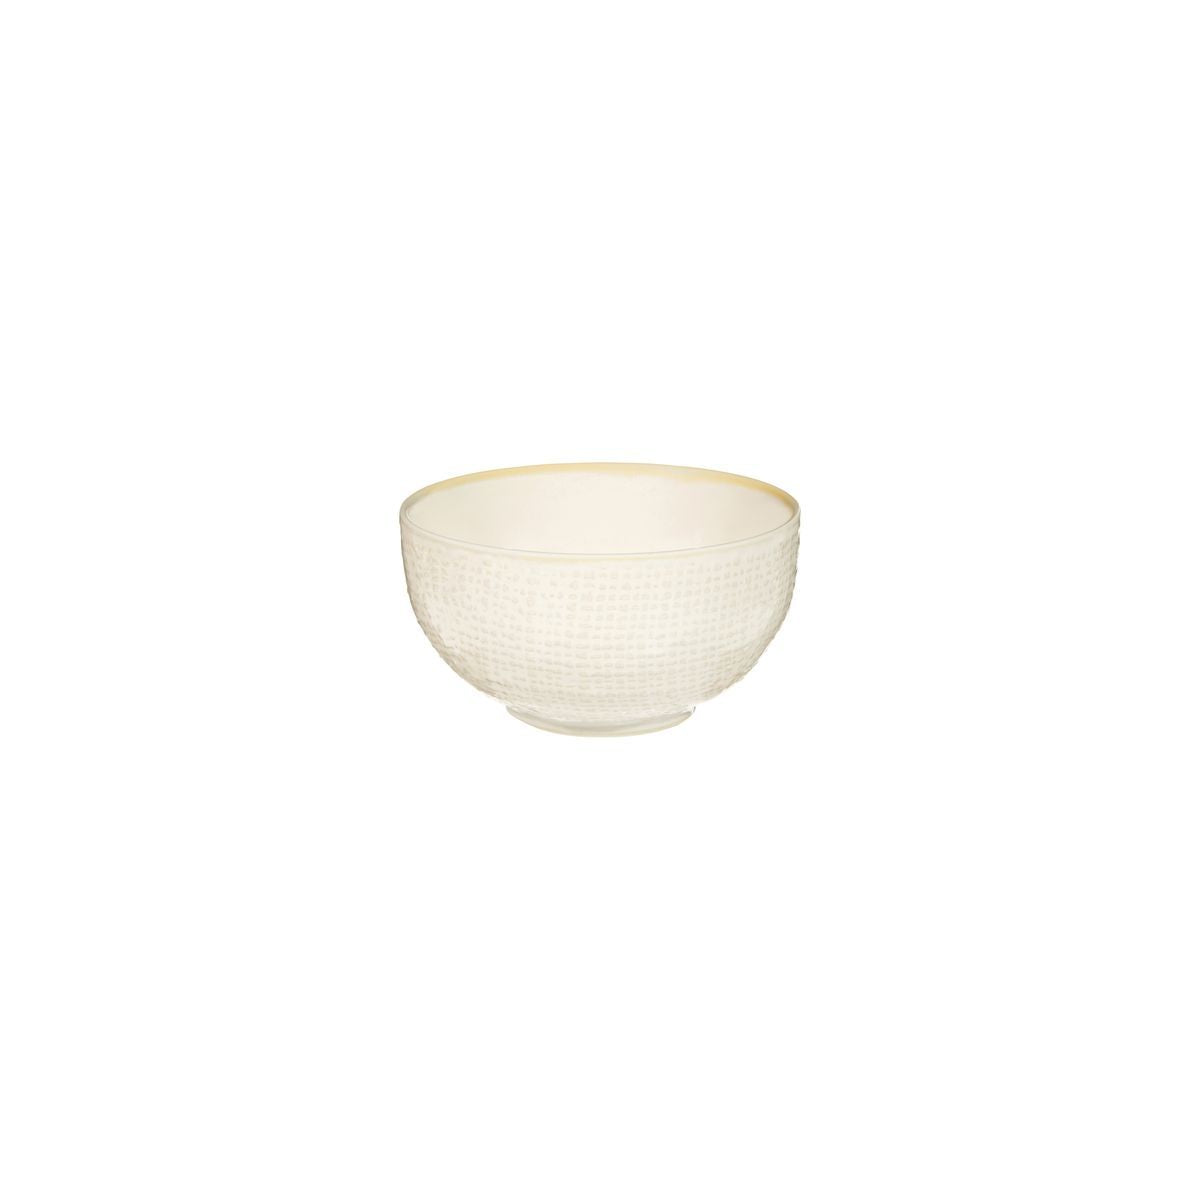 ROUND BOWL-110mm , REACTIVE WHITE from Luzerne. Textured, made out of Ceramic and sold in boxes of 6. Hospitality quality at wholesale price with The Flying Fork! 